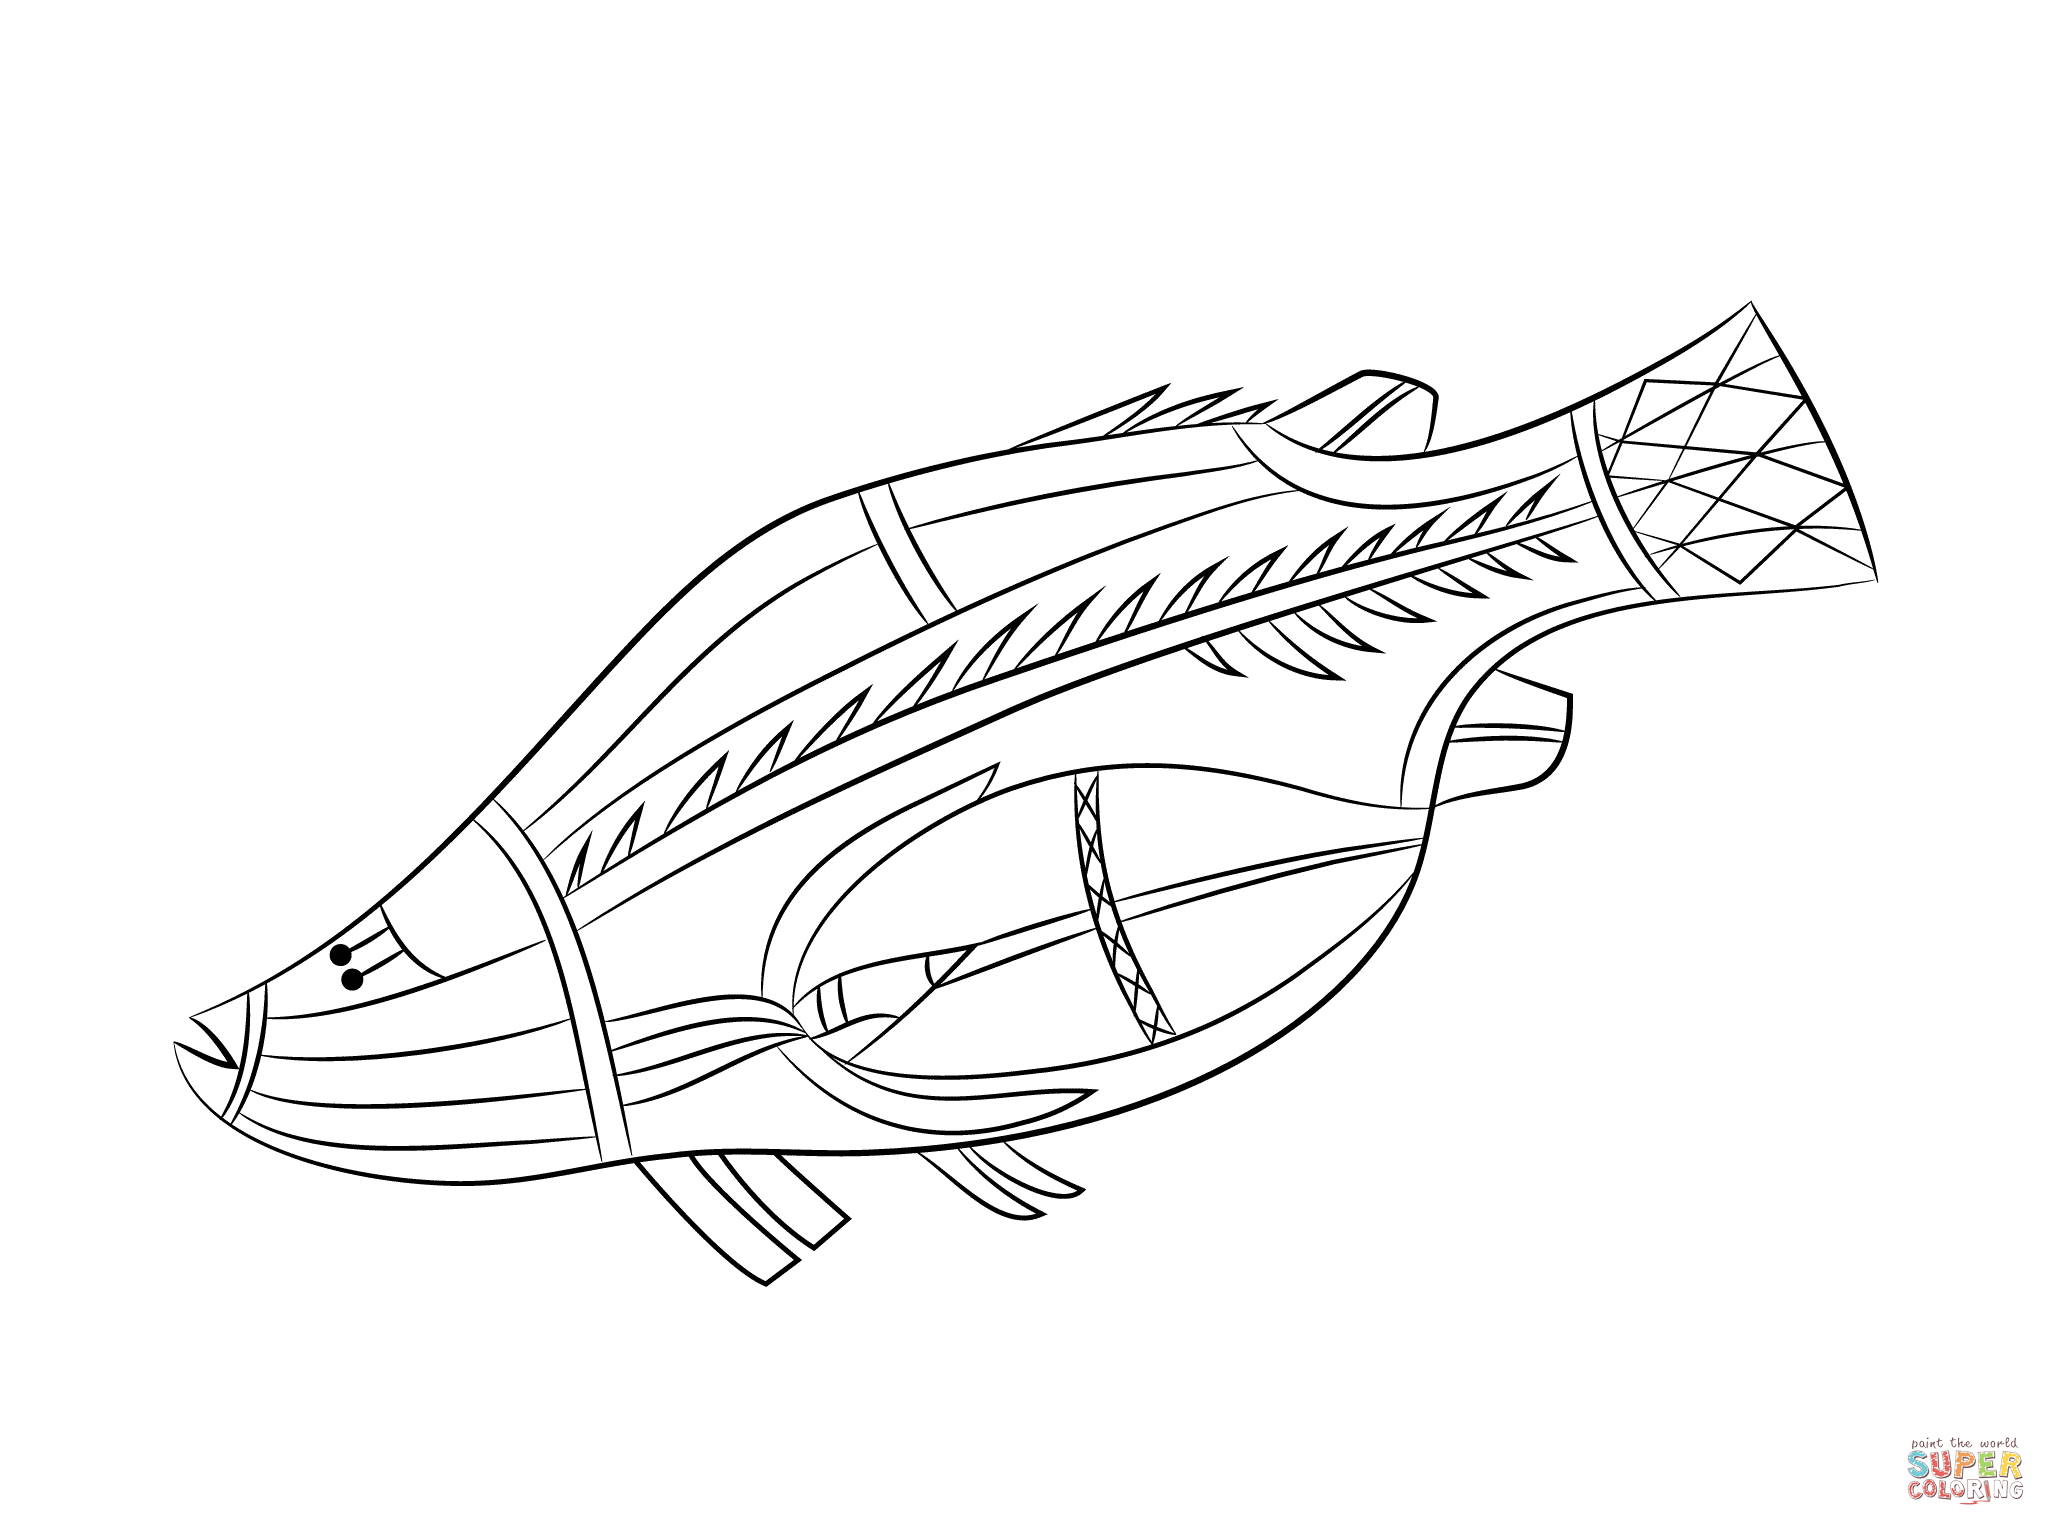 Indigenous Australians Coloring Pages | Free Coloring Pages - Free Printable Aboriginal Colouring Pages